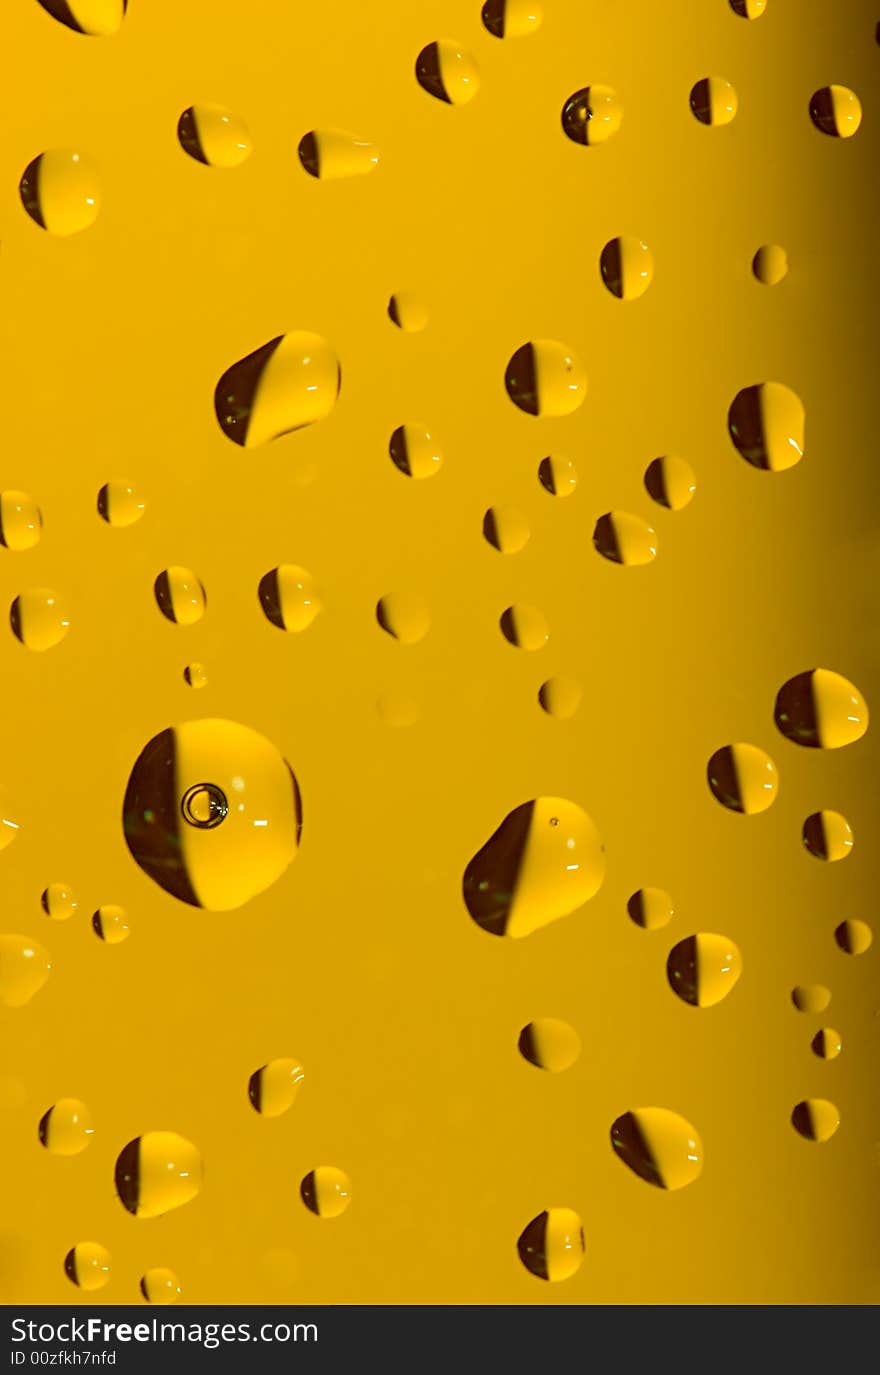 A lot of drops on yellow background